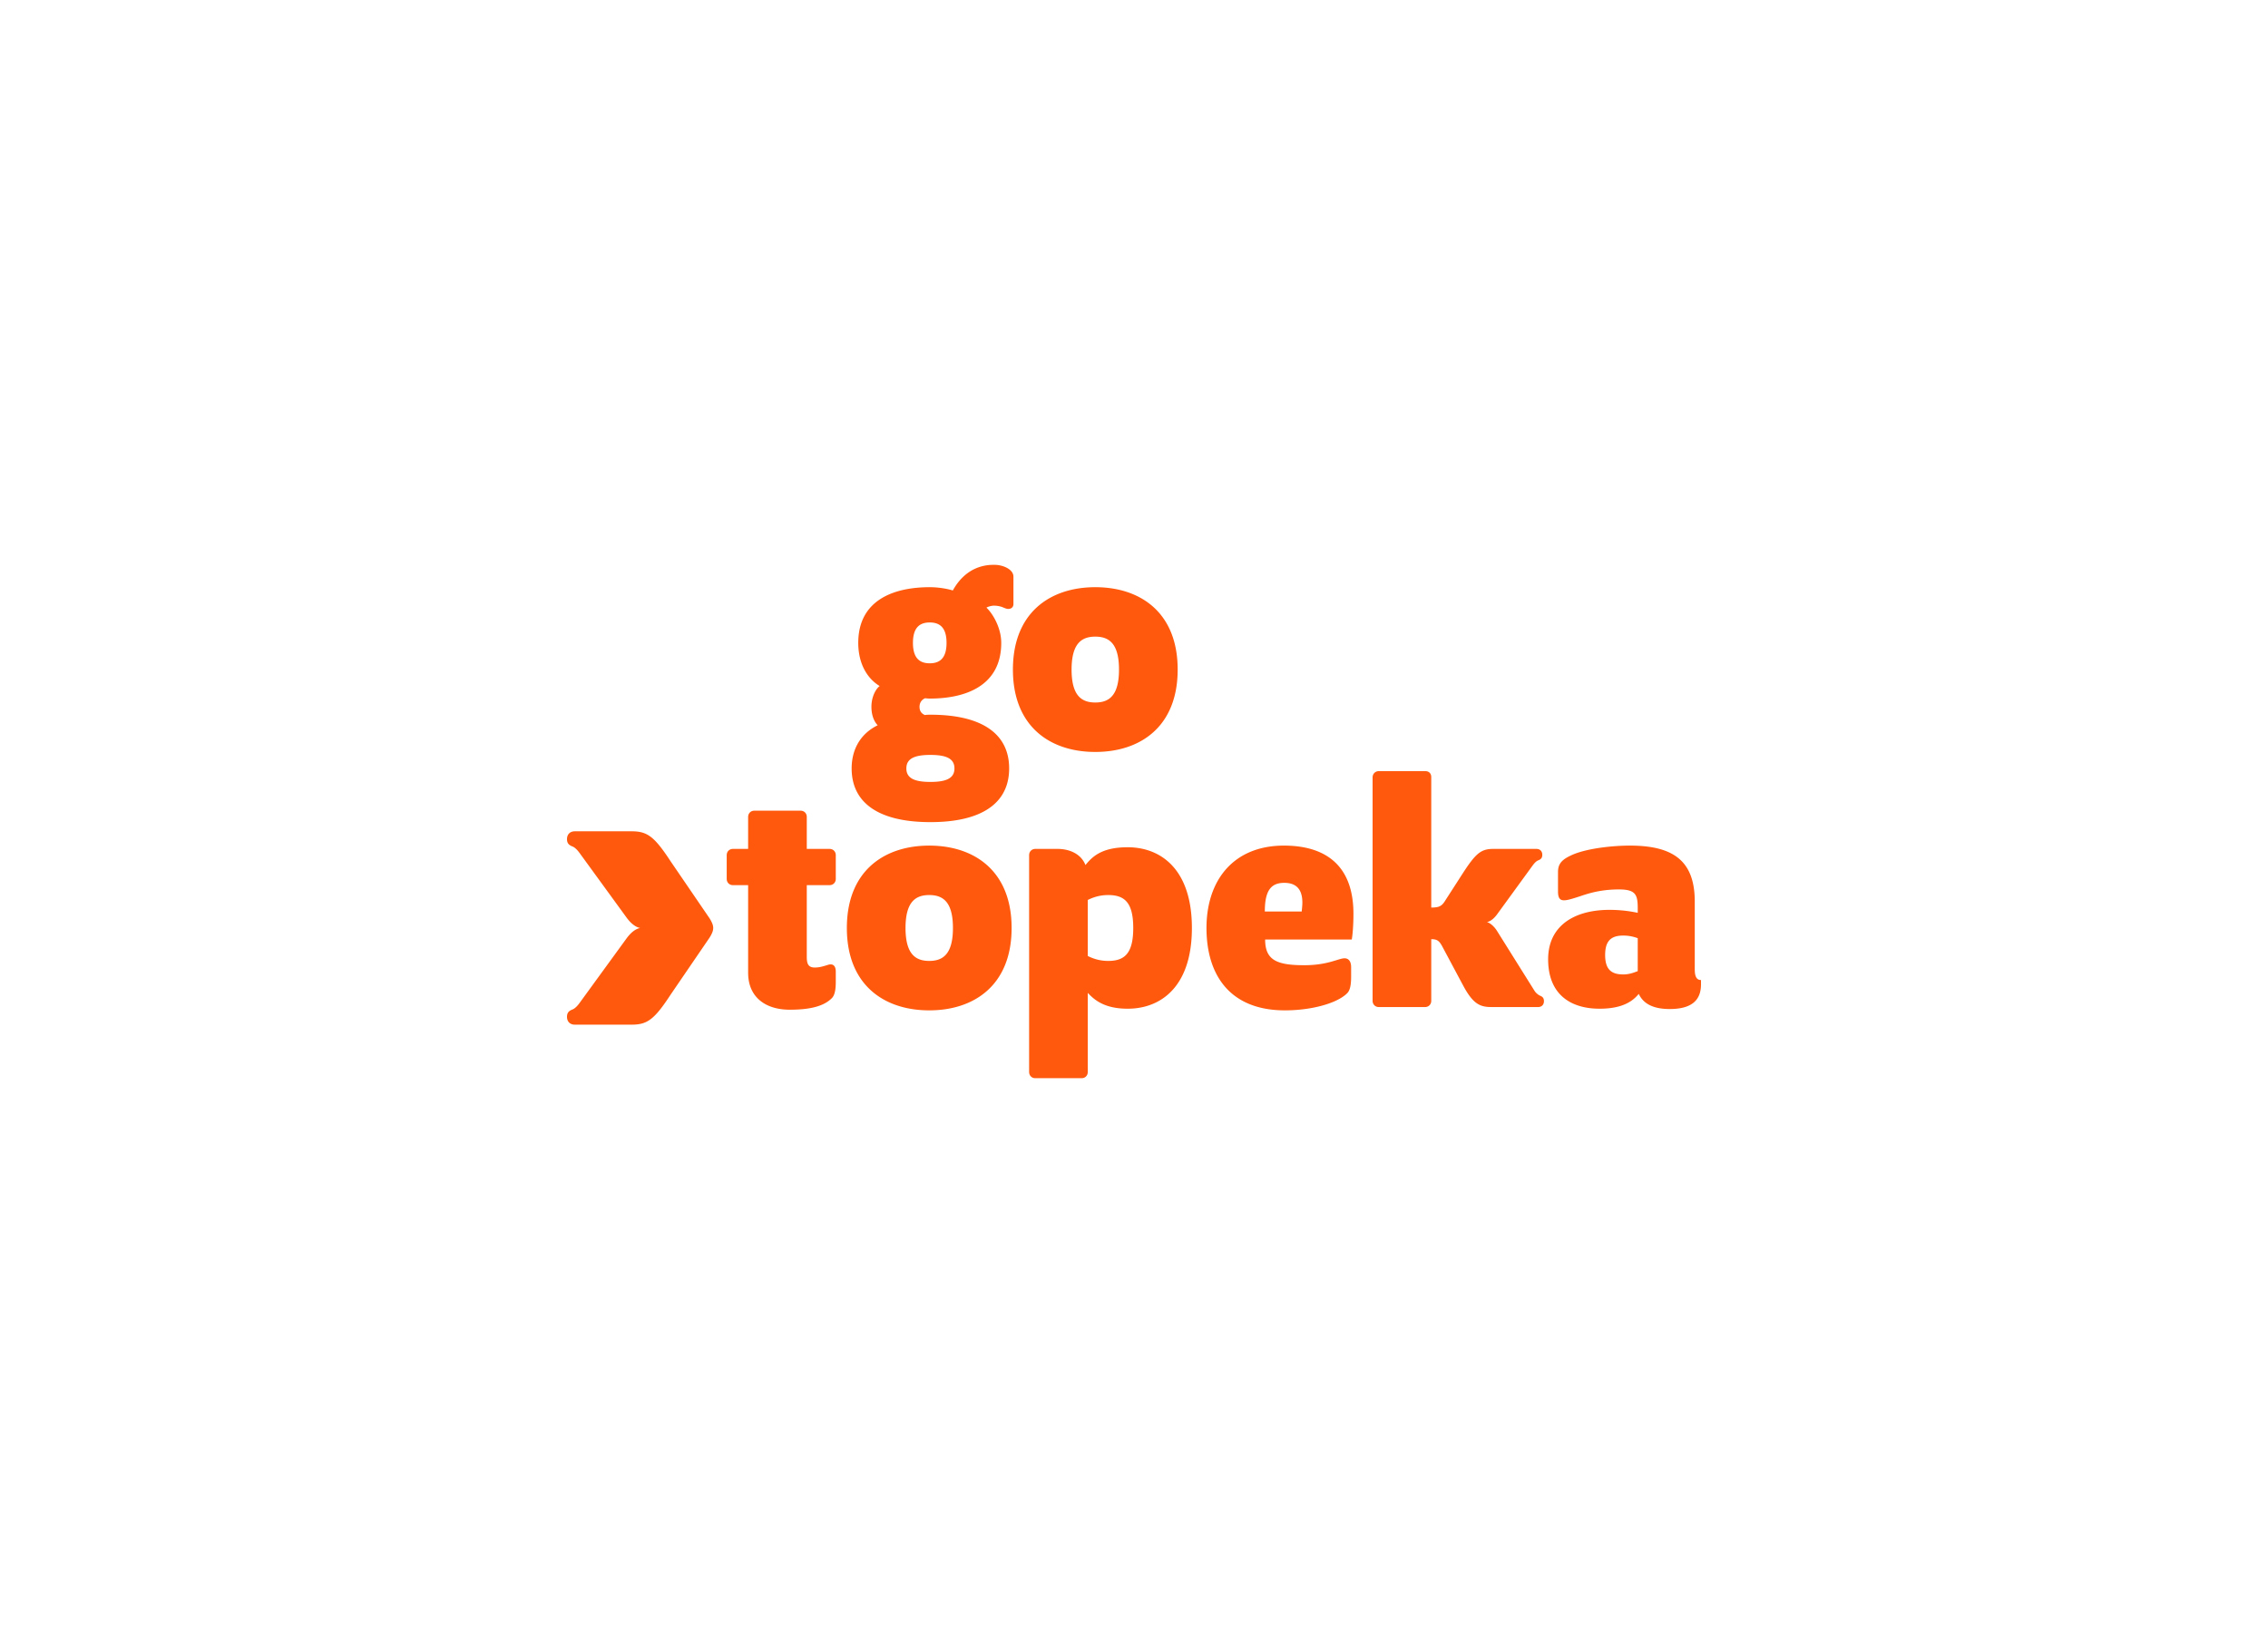 GO Topeka creates economic success for the region through implementation of an aggressive economic-development strategy that capitalizes on the strengths of the community. Logo courtesy of GO Topeka.